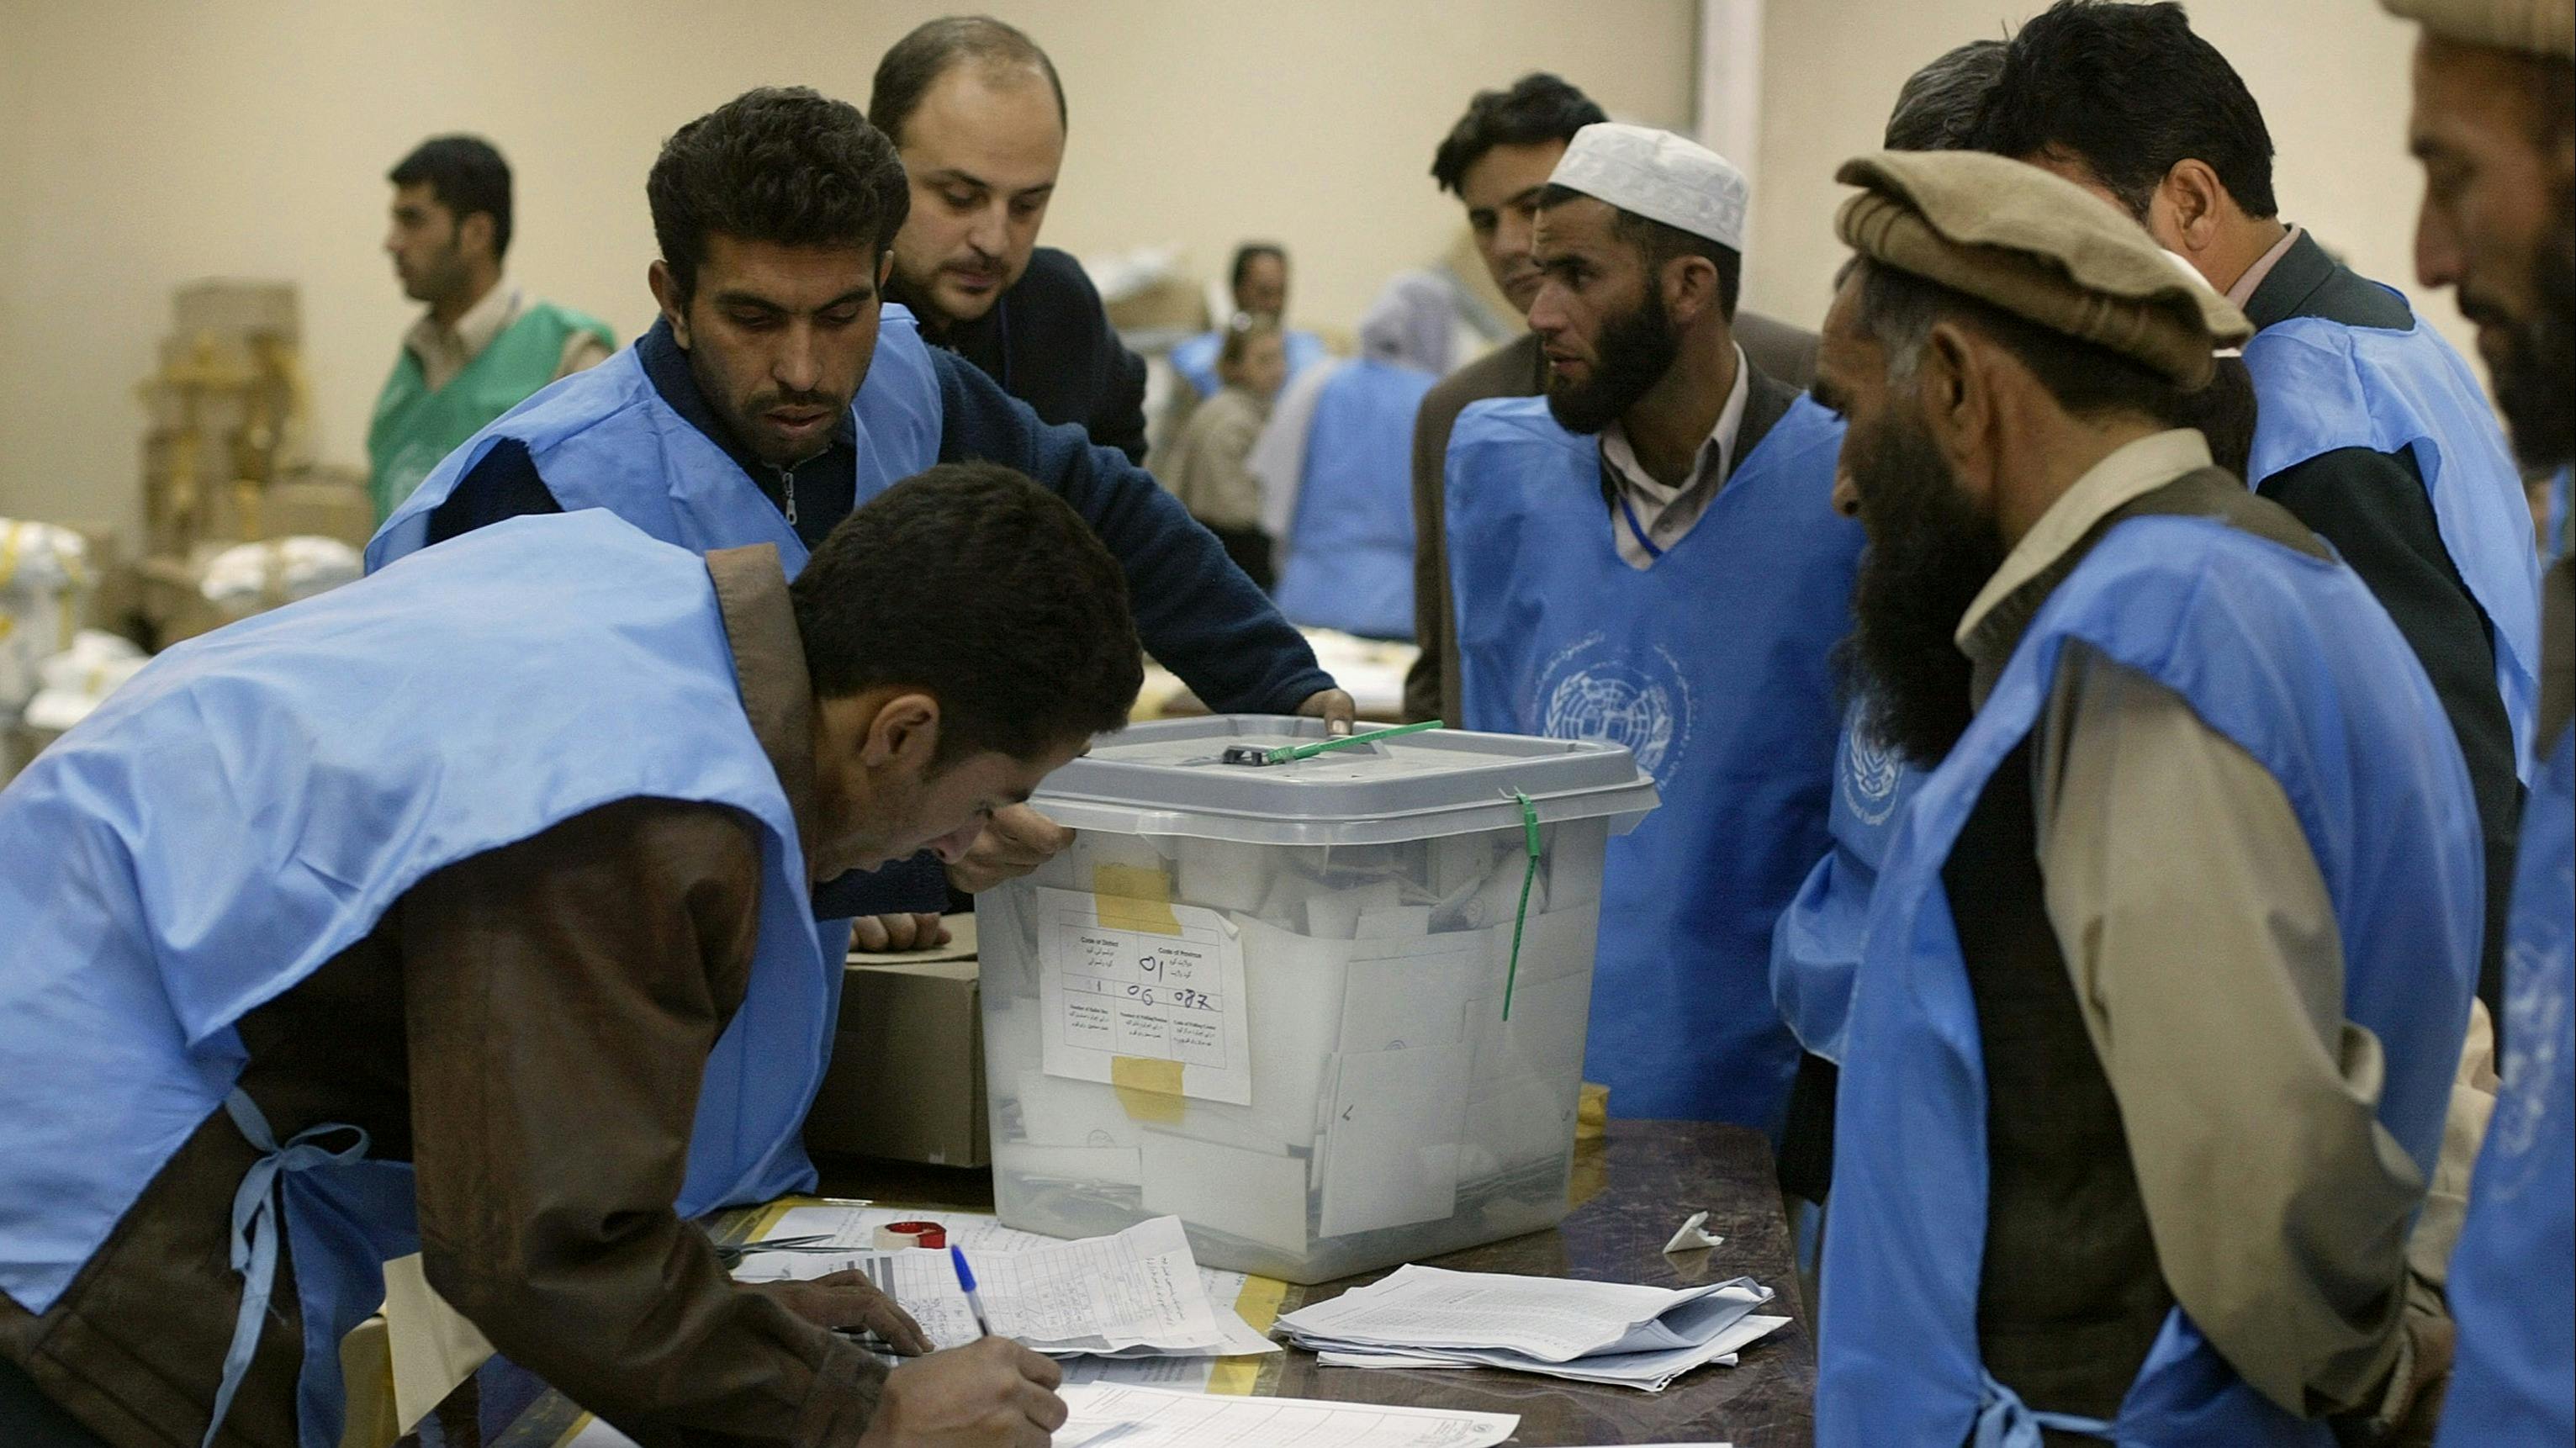 Afghans and United Nations officials record votes from ballot boxes received from Kabul polling stations after Afghanistan's first ever presidential elections, on October 10, 2004 in Kabul, Afghanistan. 